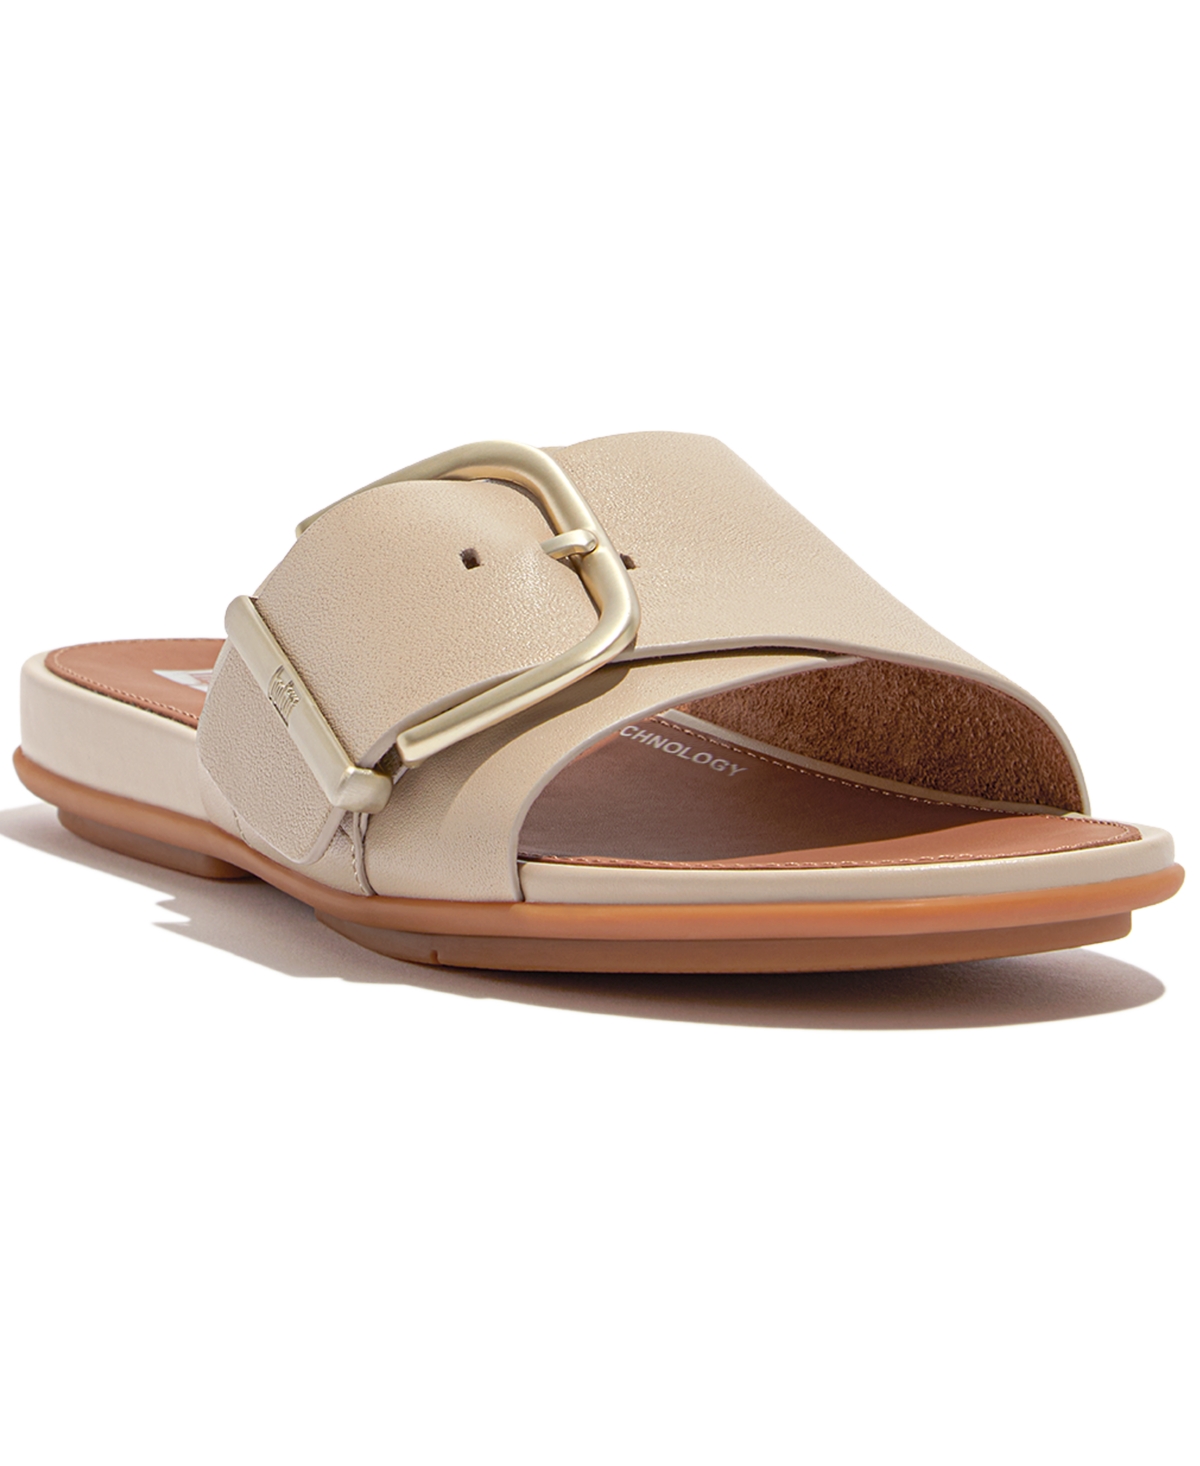 FITFLOP WOMEN'S GRACIE MAXI-BUCKLE LEATHER SLIDES